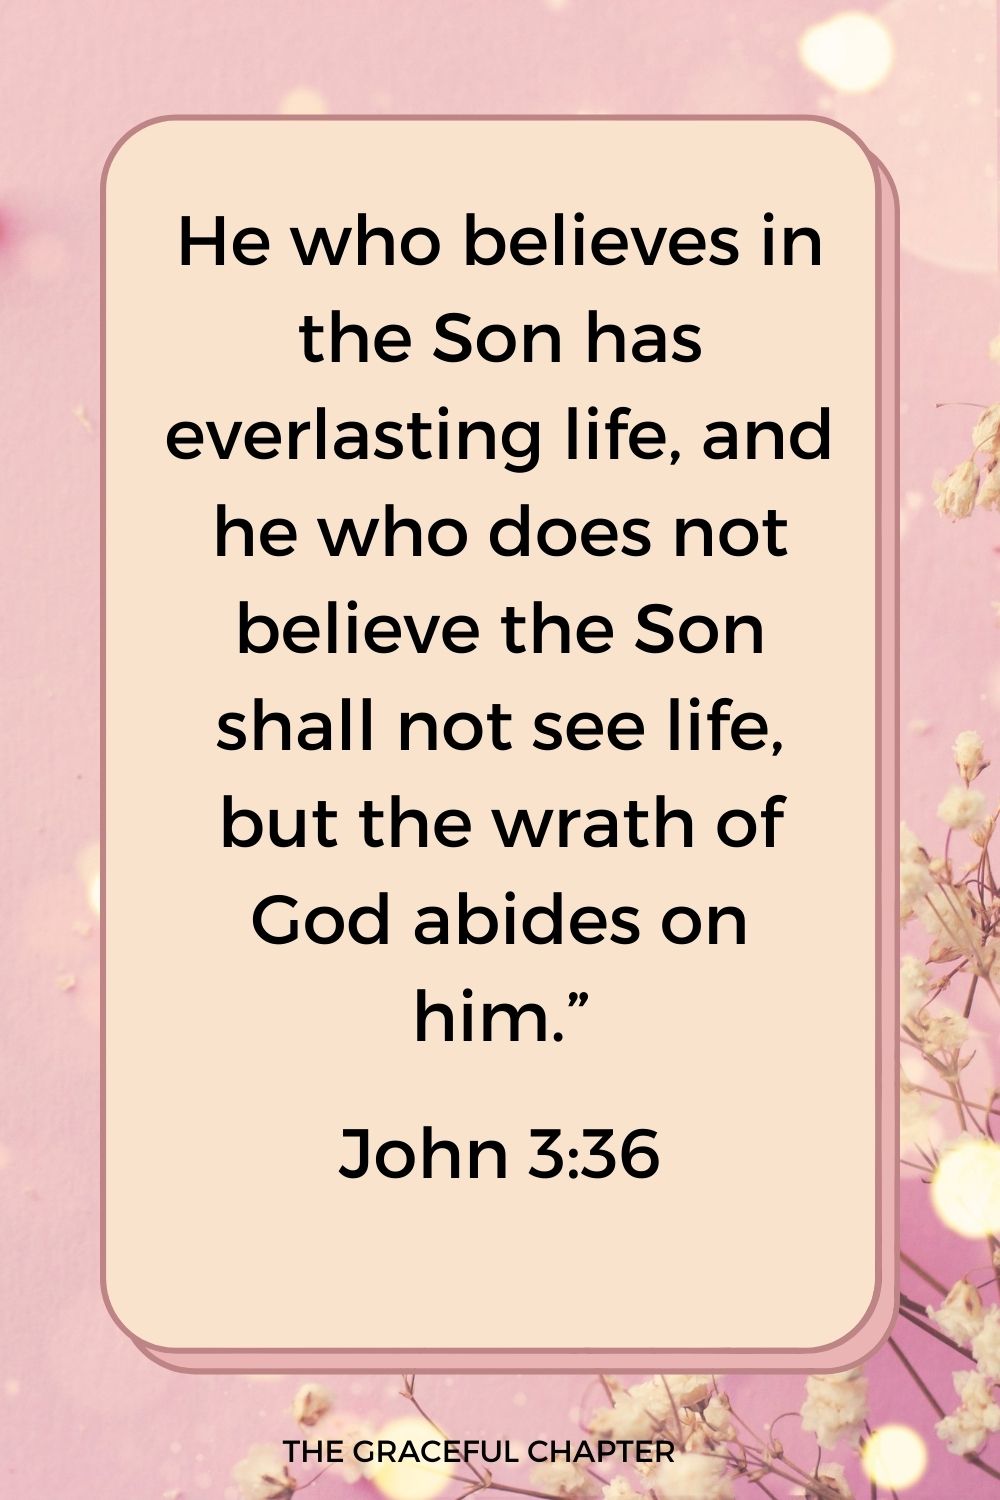 He who believes in the Son has everlasting life, and he who does not believe the Son shall not see life, but the wrath of God abides on him.” John 3:36